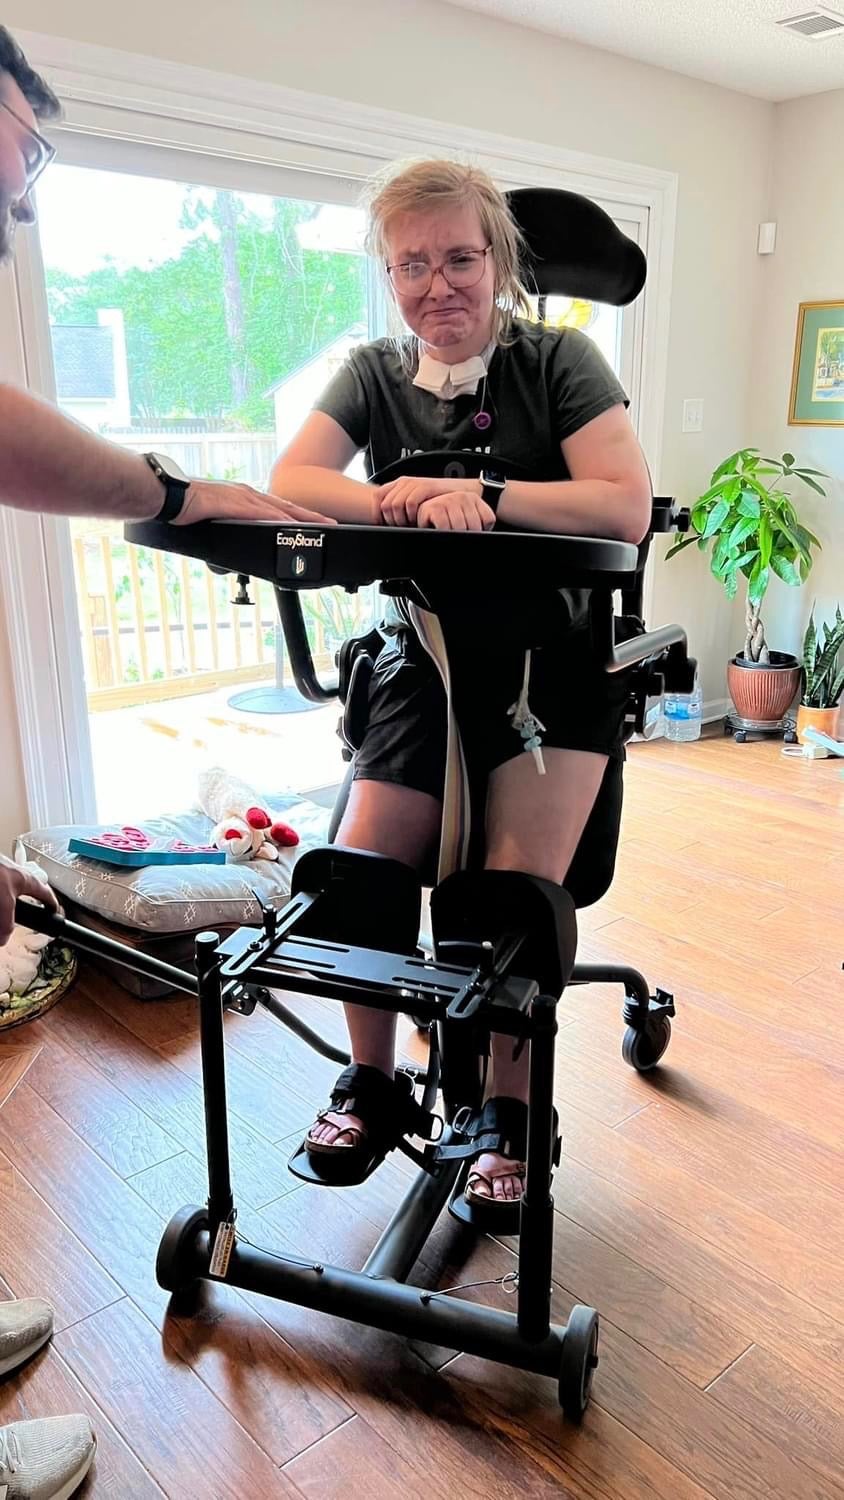 Caitlin practices at home with a loner standing frame, which is ‘tremendously helpful to her recovery’ and which her mother is attempting to get insurance to help finance